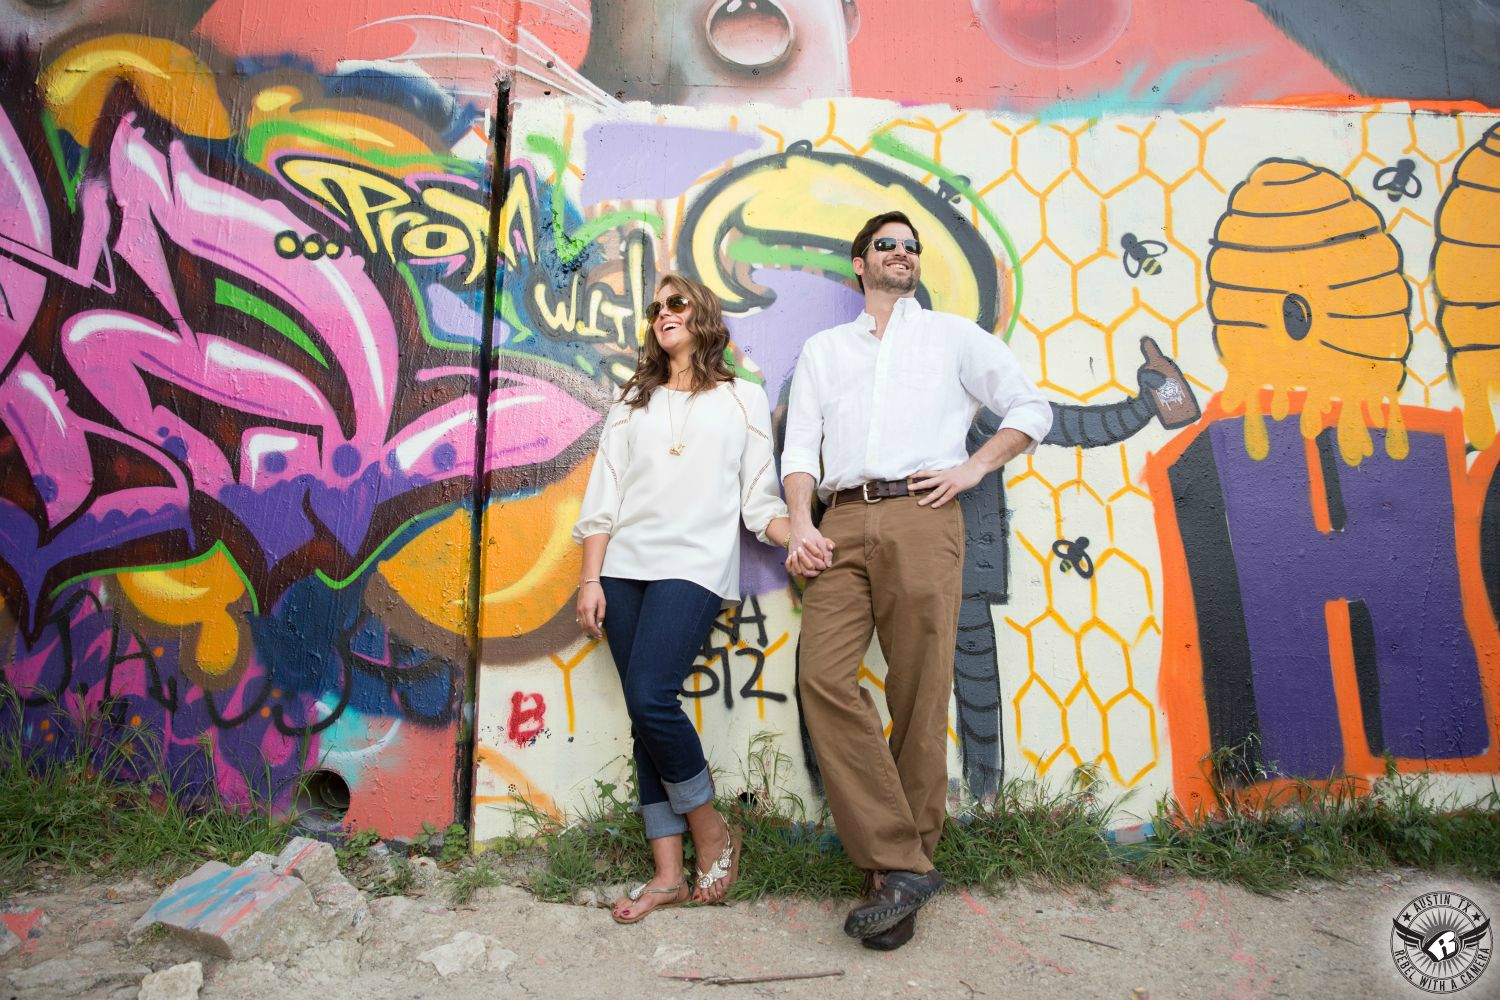 engagement couple with sun glasses laughing in white shirts and jeans with flip flops leaning against a wall covered in graffiti with bright colors and a honeycomb and bender and words all over the wall 